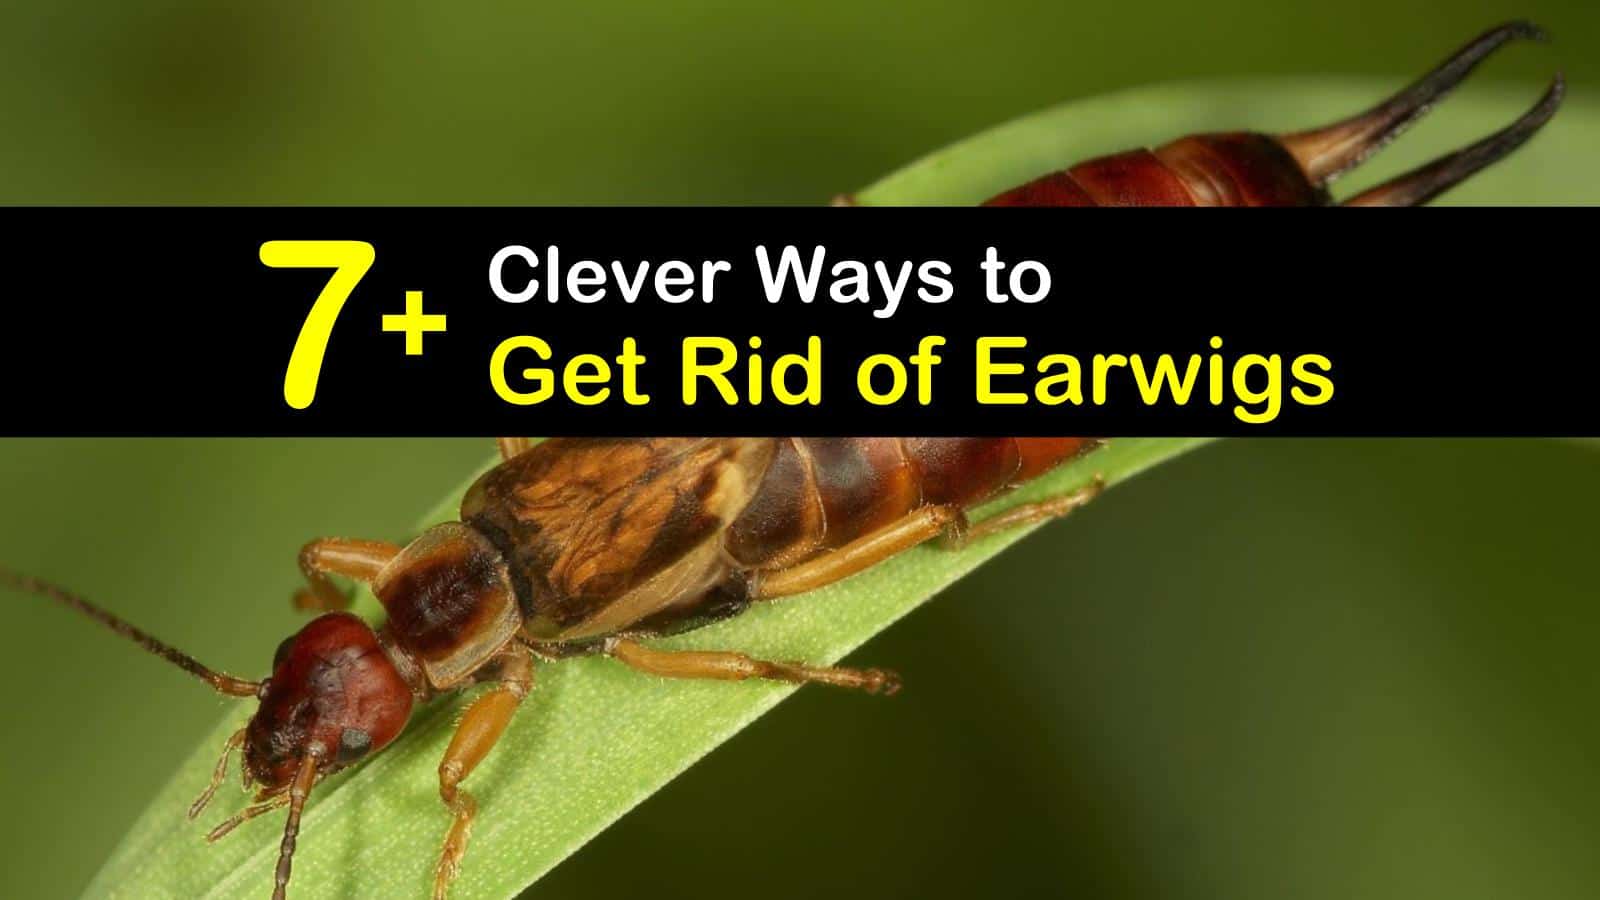 how to get rid of earwigs titleimg1